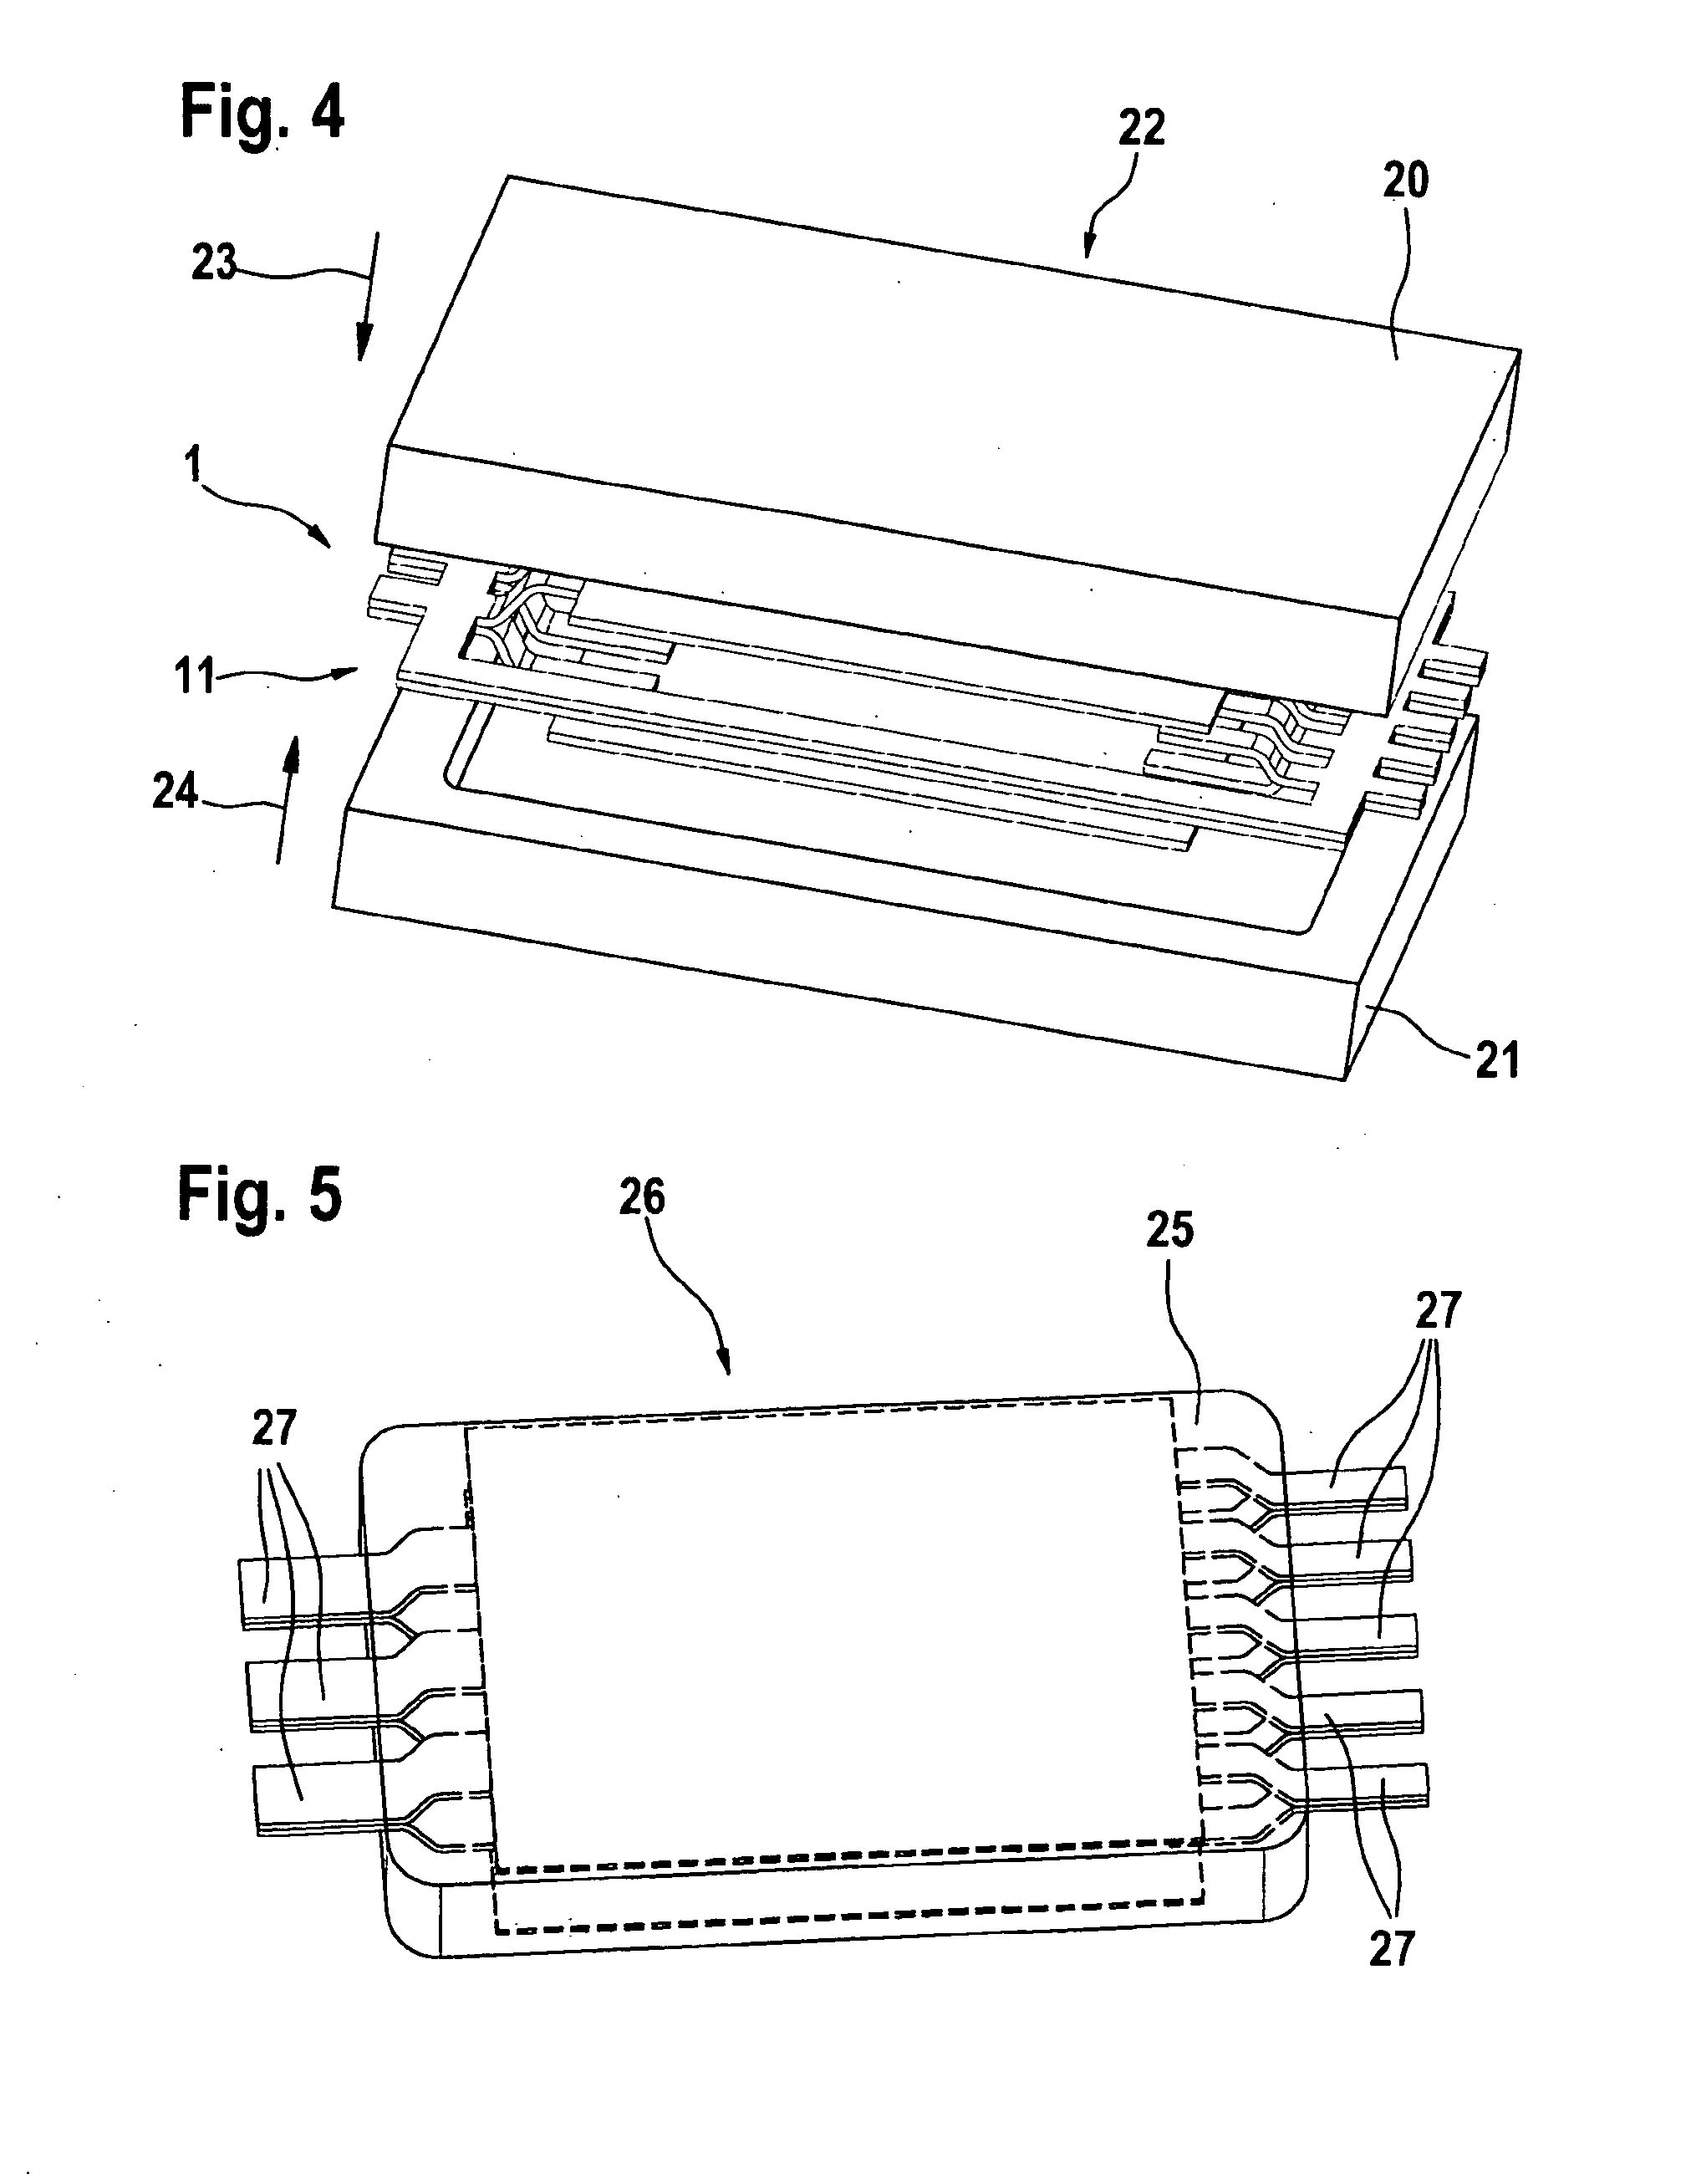 Electronic module and method for manufacturing an electronic module